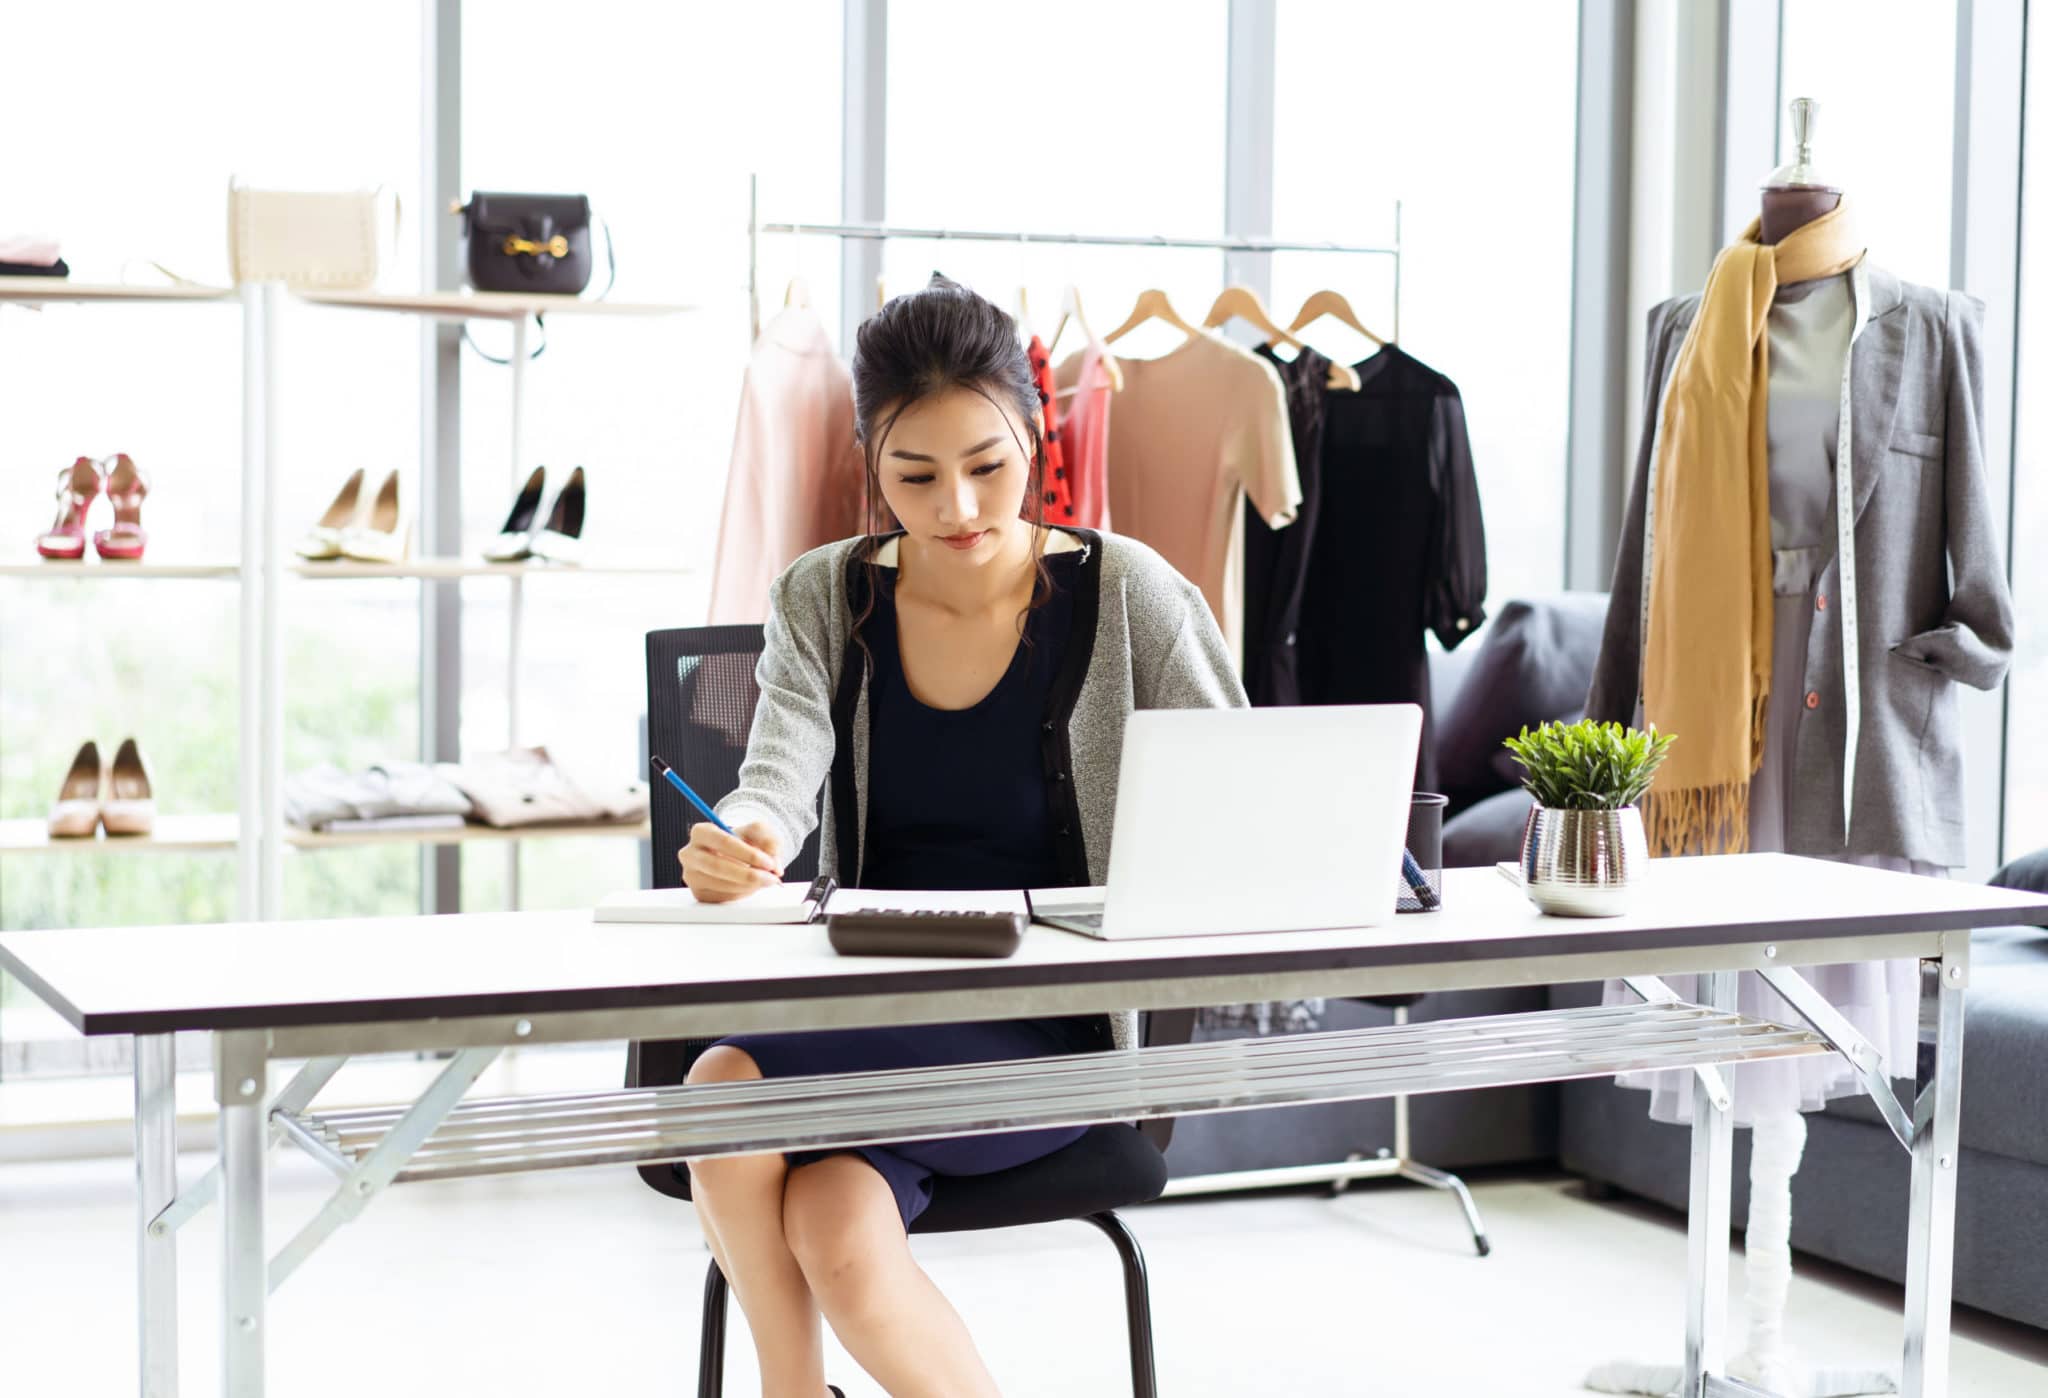 Young business Asian woman sitting at table and taking notes in notebook on table is laptop in clothes shop. Startup Small Business Owner Concept.; Shutterstock ID 1419827879; Purchase Order: ADI